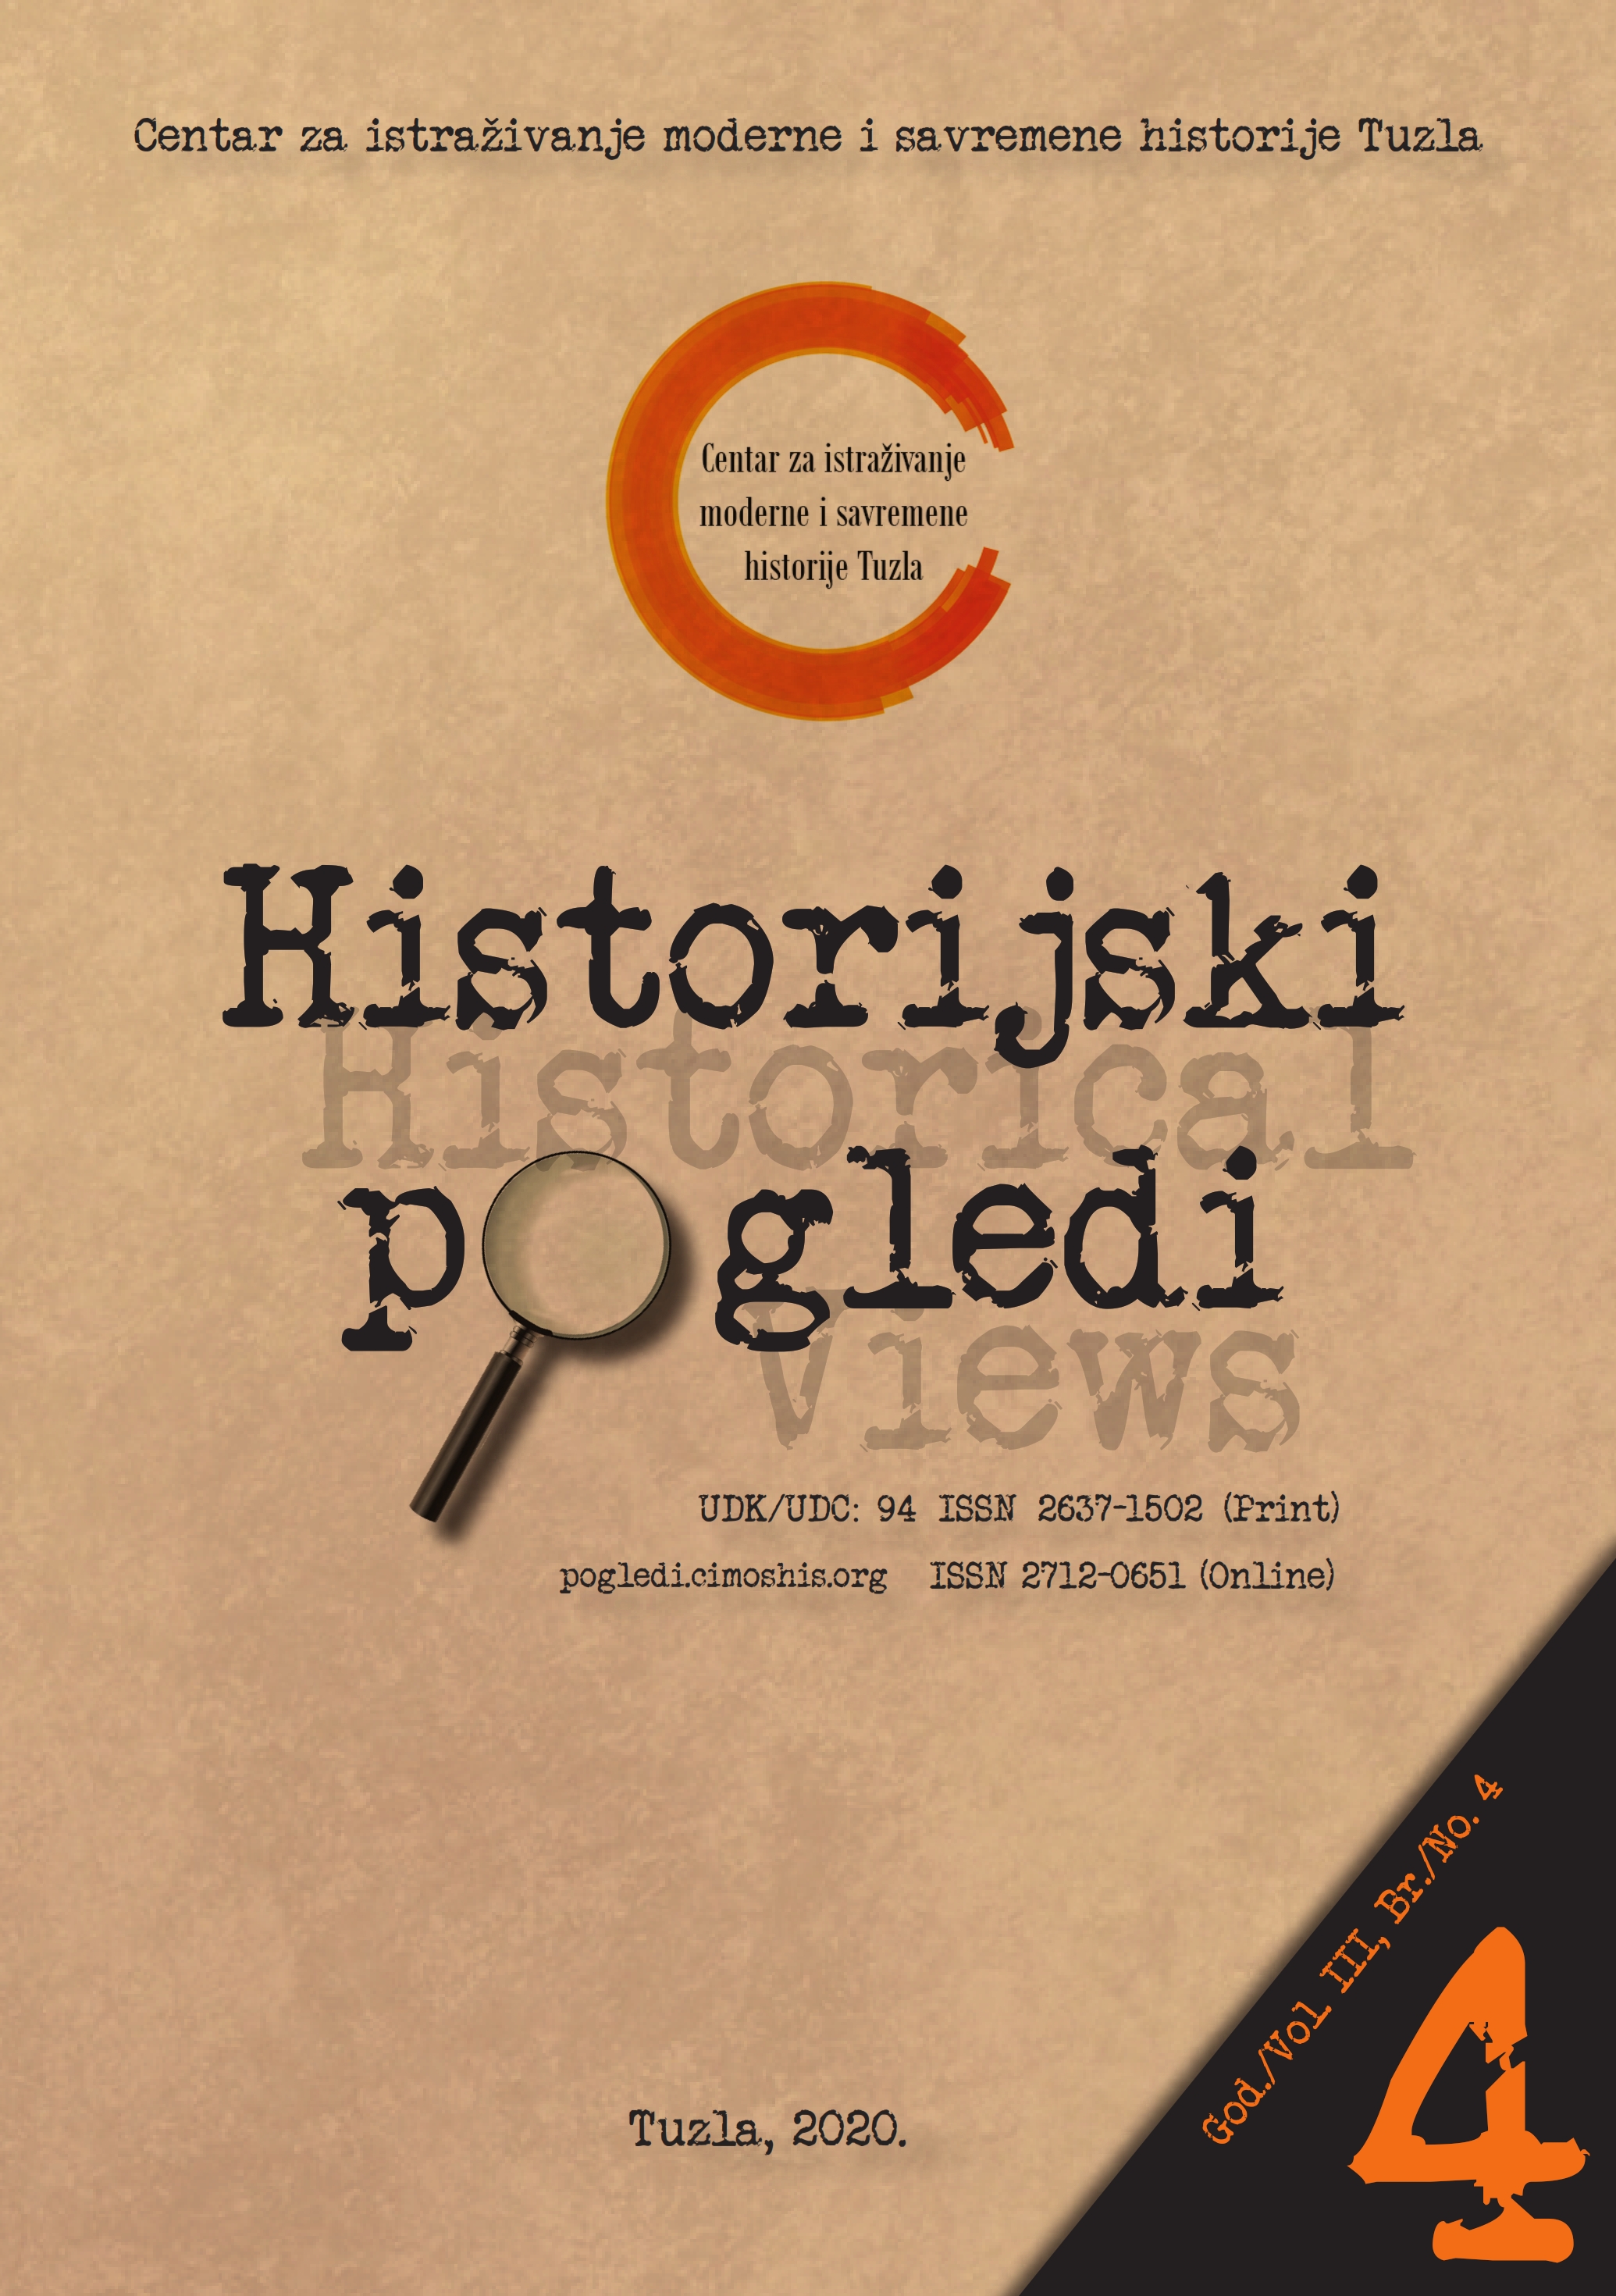 SERBIAN AND CROATIAN GREAT STATE POLICY AND ATTITUDE TOWARDS BOSNIA AND HERZEGOVINA ON THE EXAMPLE OF HISTORY TEXTBOOKS Cover Image